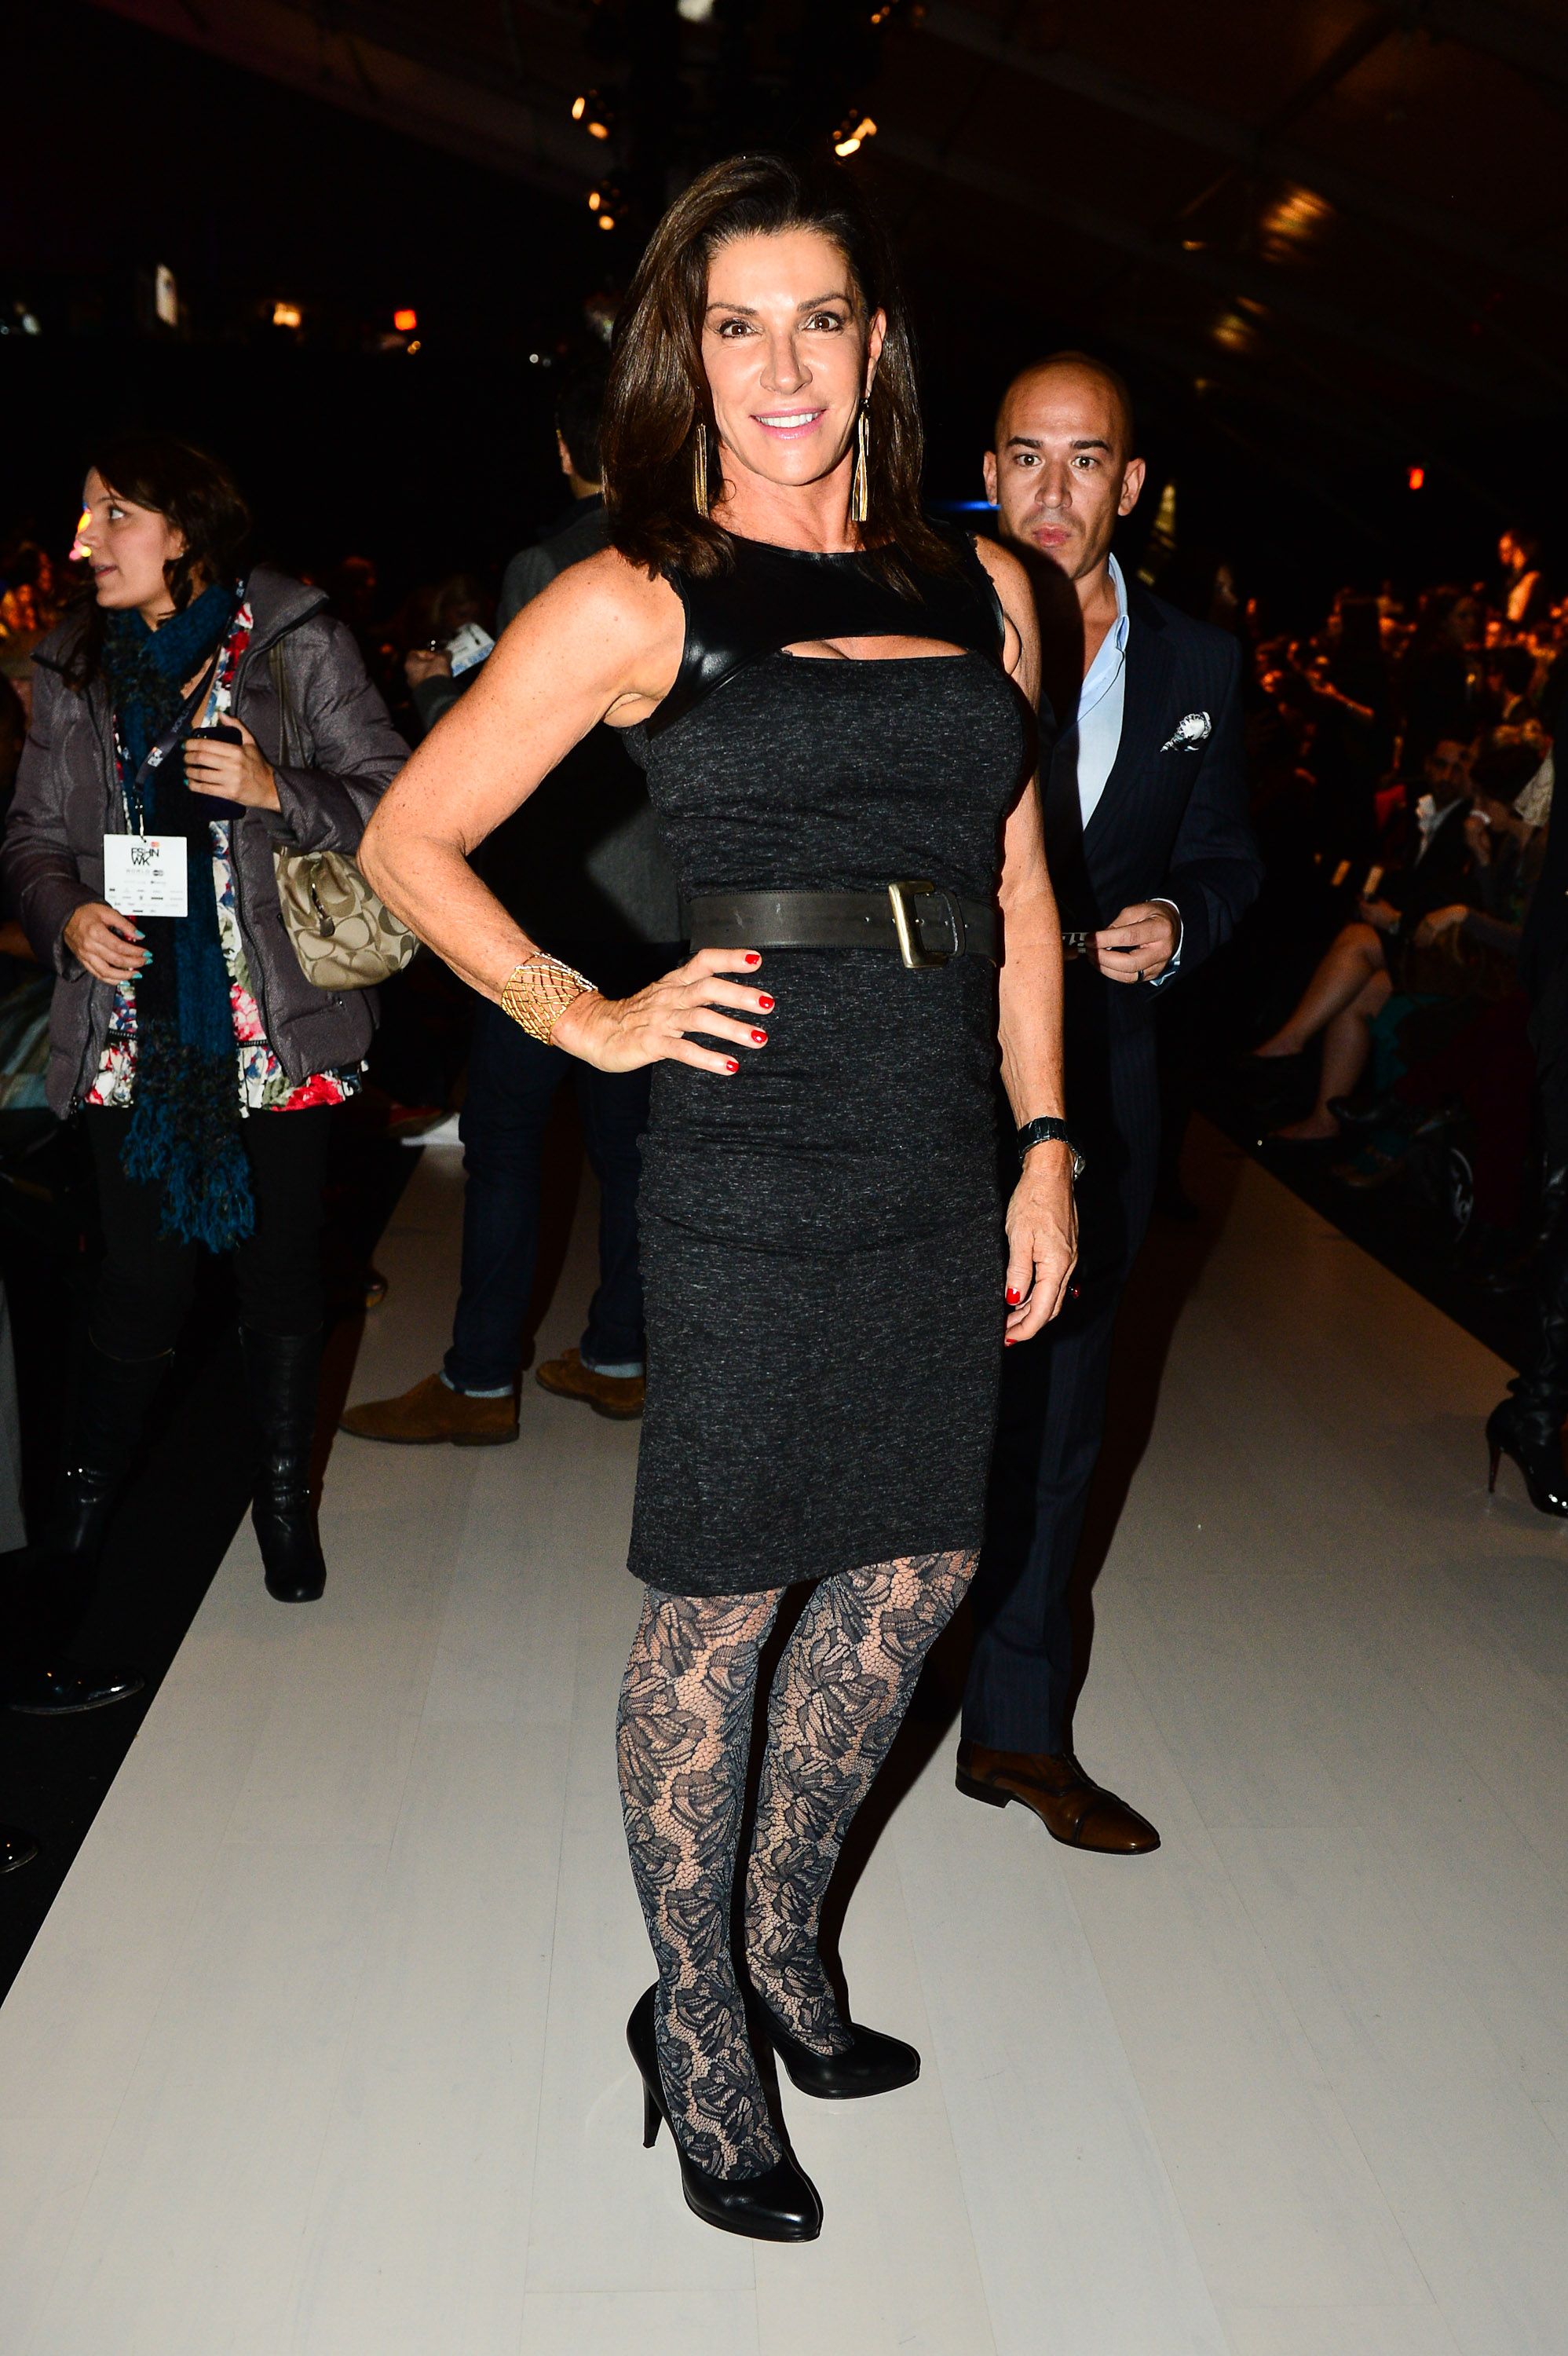 Hilary Farr during World MasterCard Fashion Week at David Pecaut Square on October 24, 2012, in Toronto, Canada | Photo: George Pimentel/Getty Images